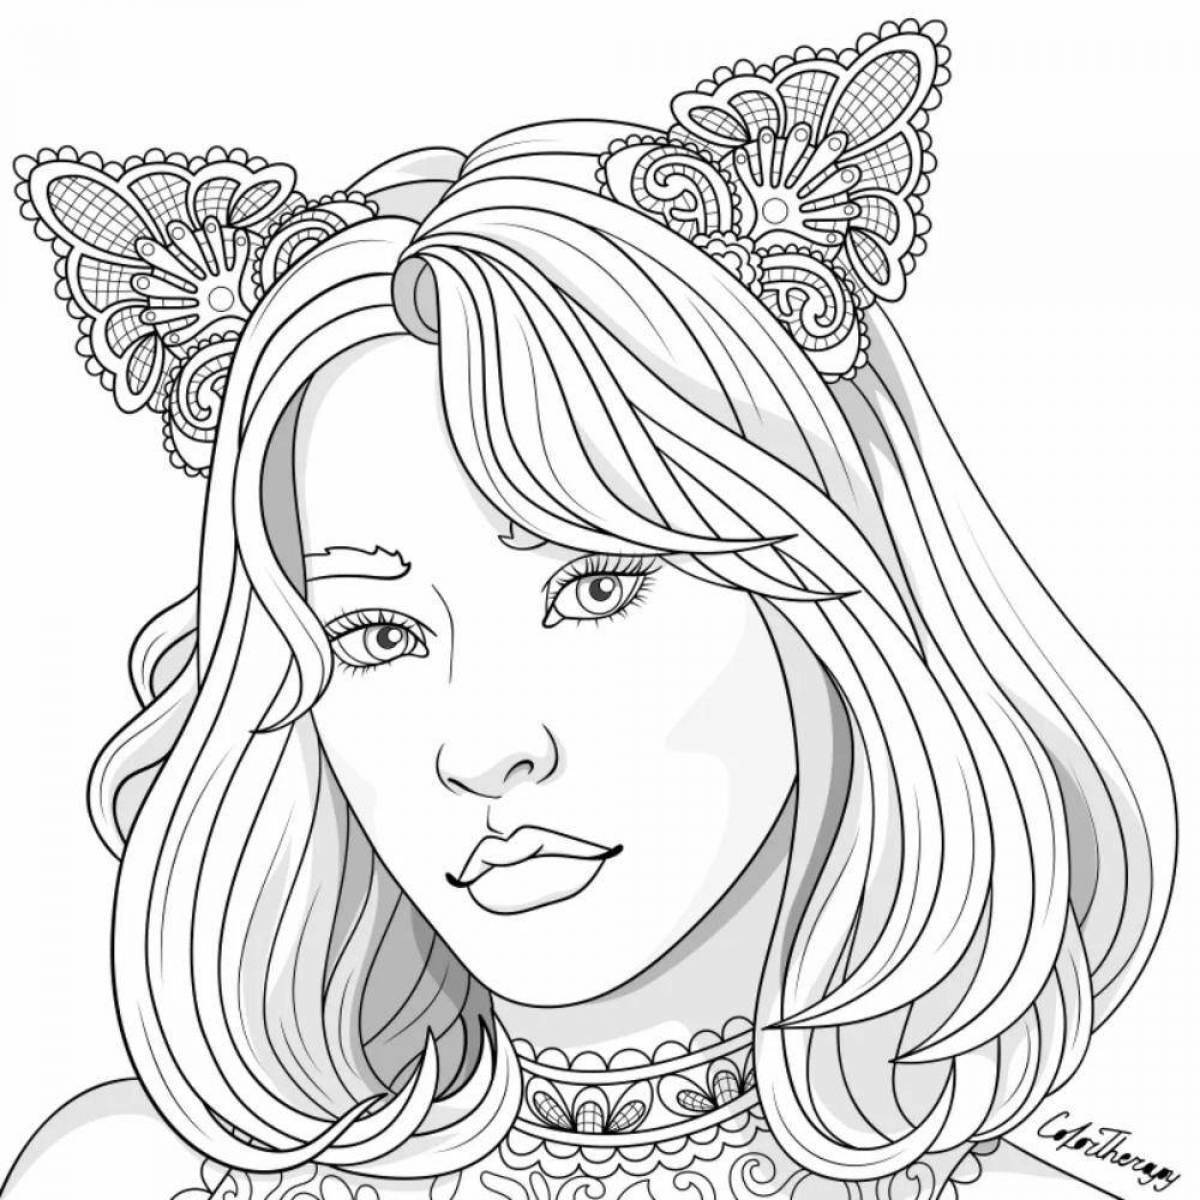 Witty coloring page 18 years old vulgarity